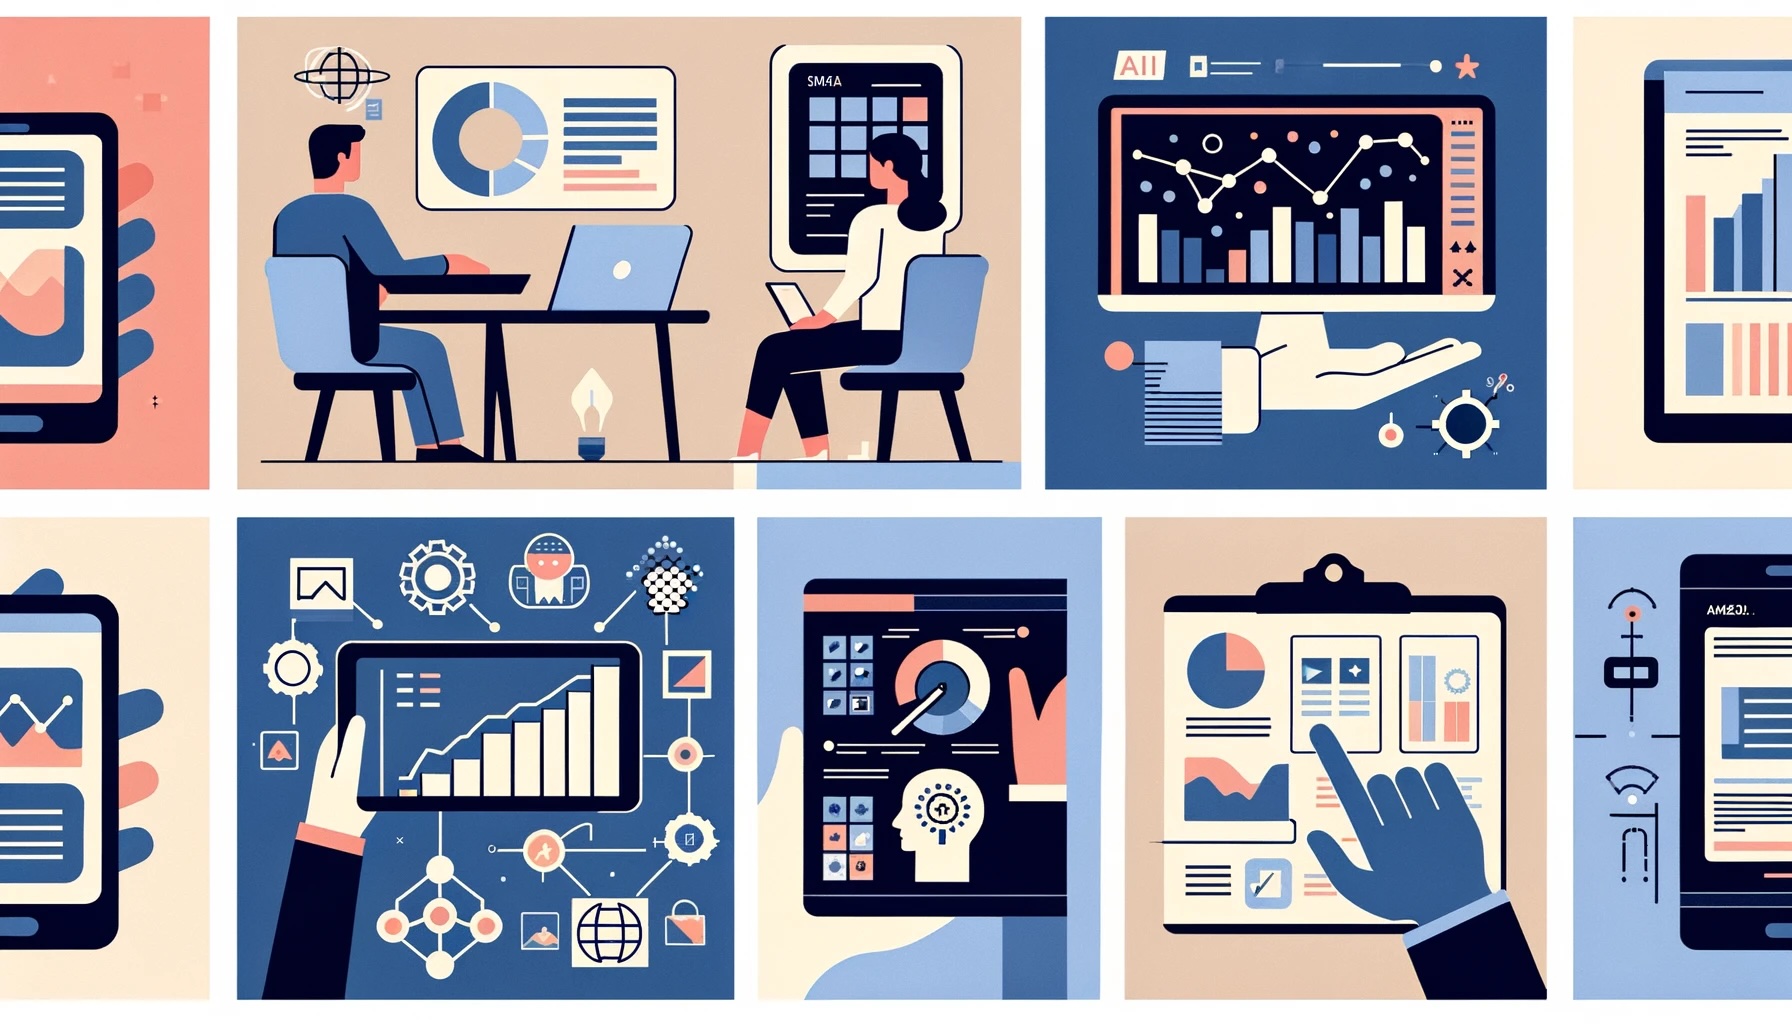 Stylized image of multiple panels featuring graphic representations of ecommerce product research